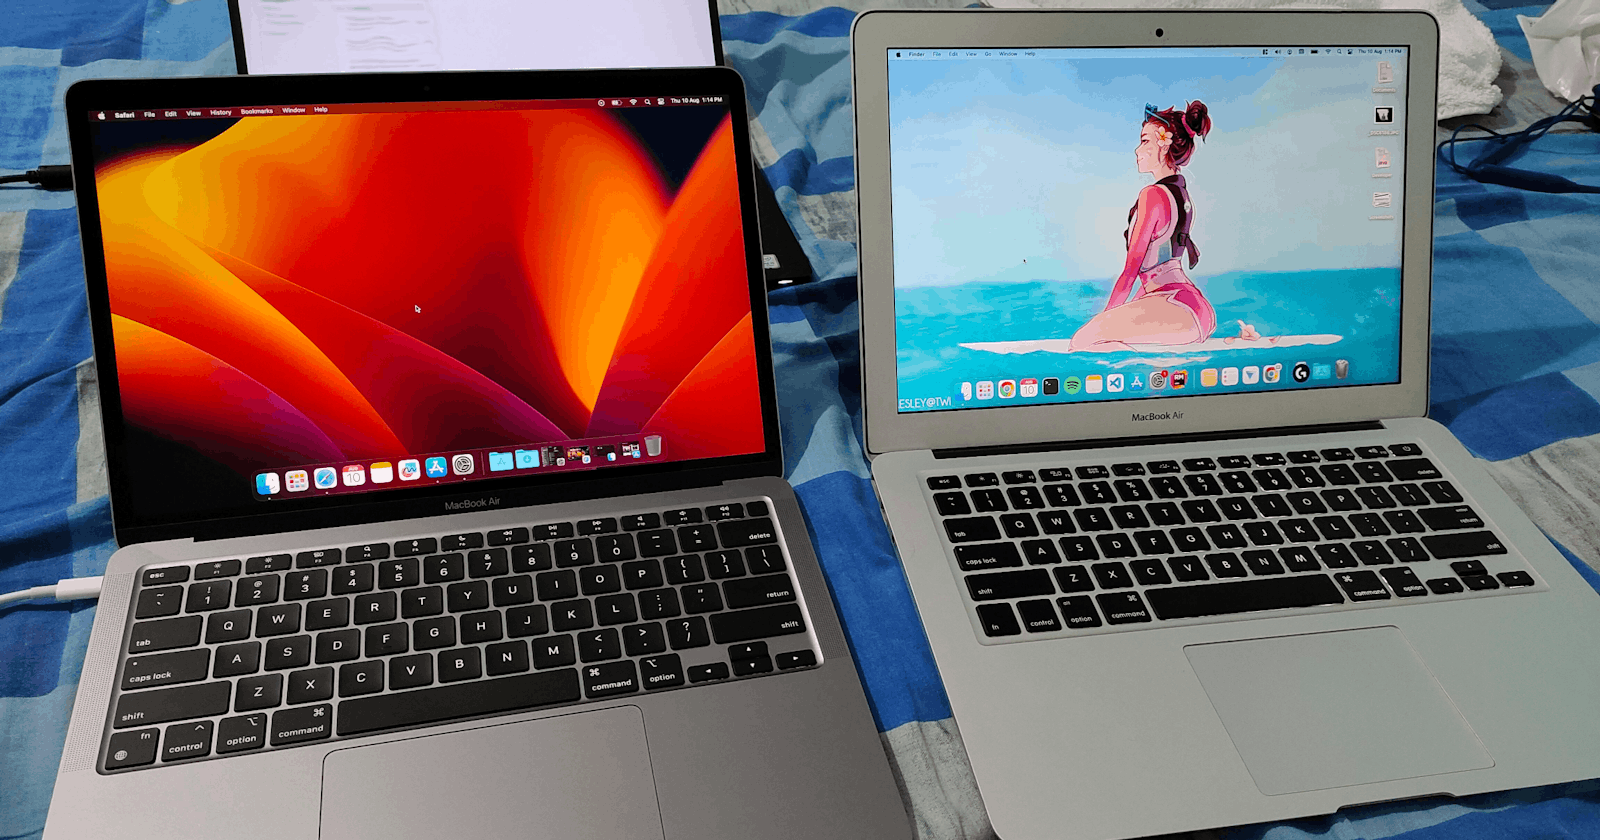 Upgraded from 2017 MacBook Air to 2020 MacBook Air M1 (8GB to 8 GB) 🤔